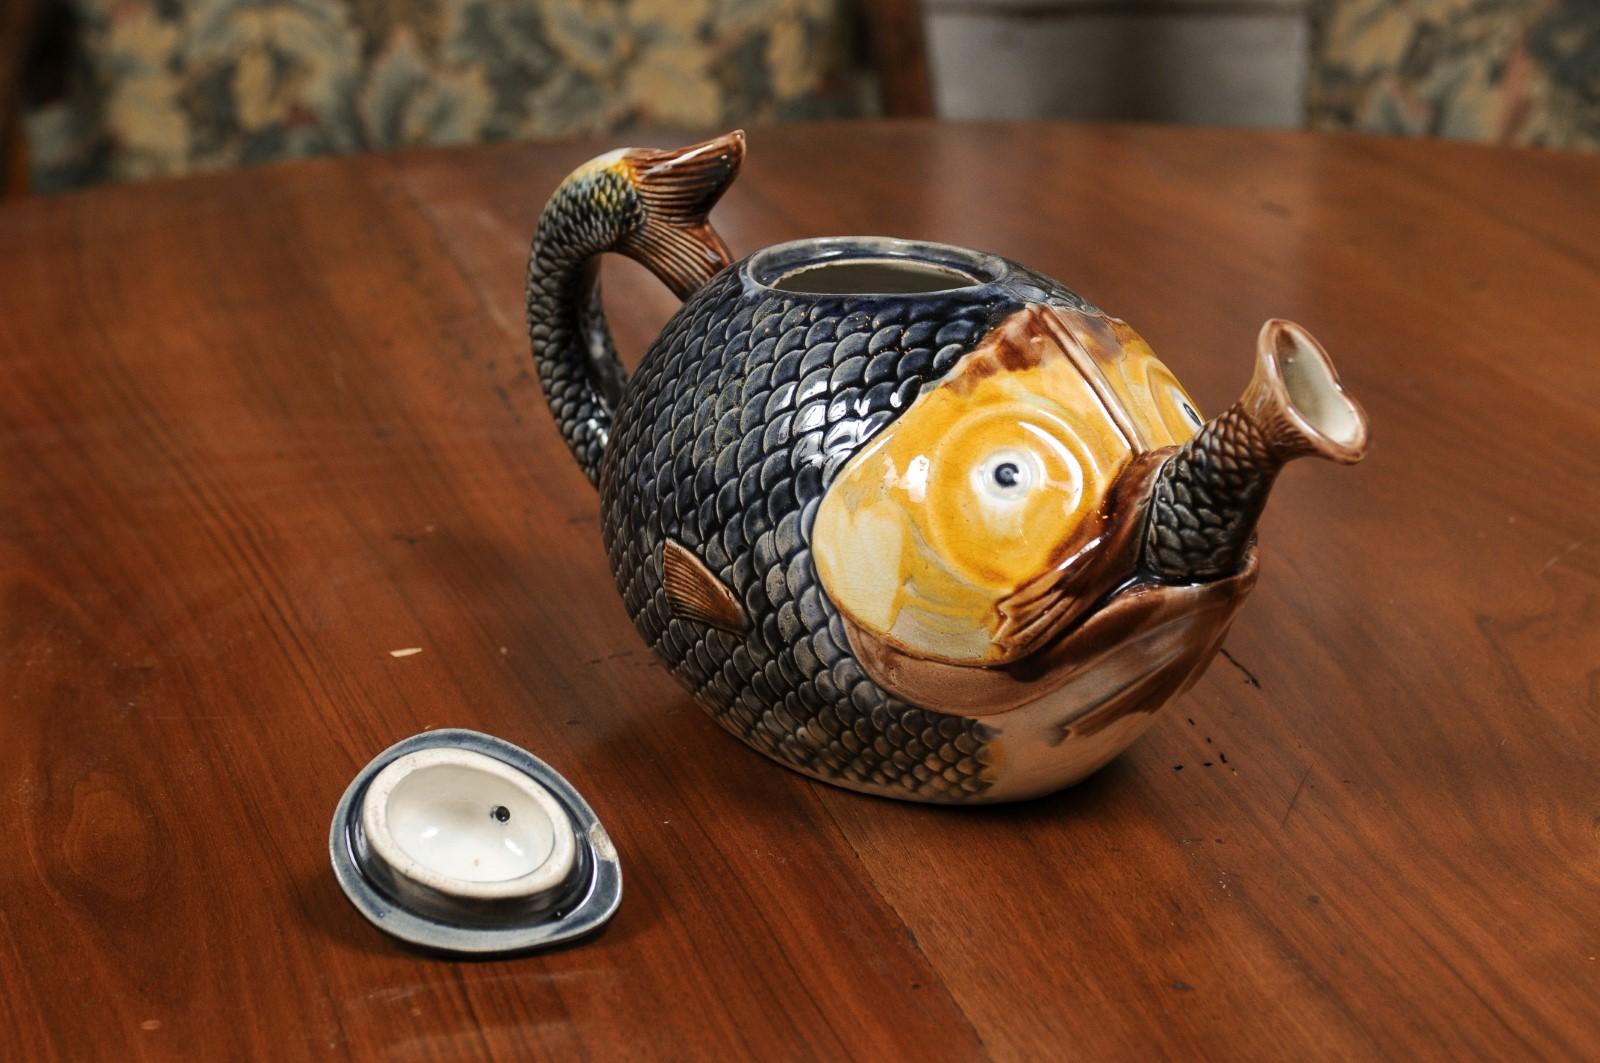 French 1885s Glazed Majolica Teapot Depicting a Fish Eating Another Fish 9